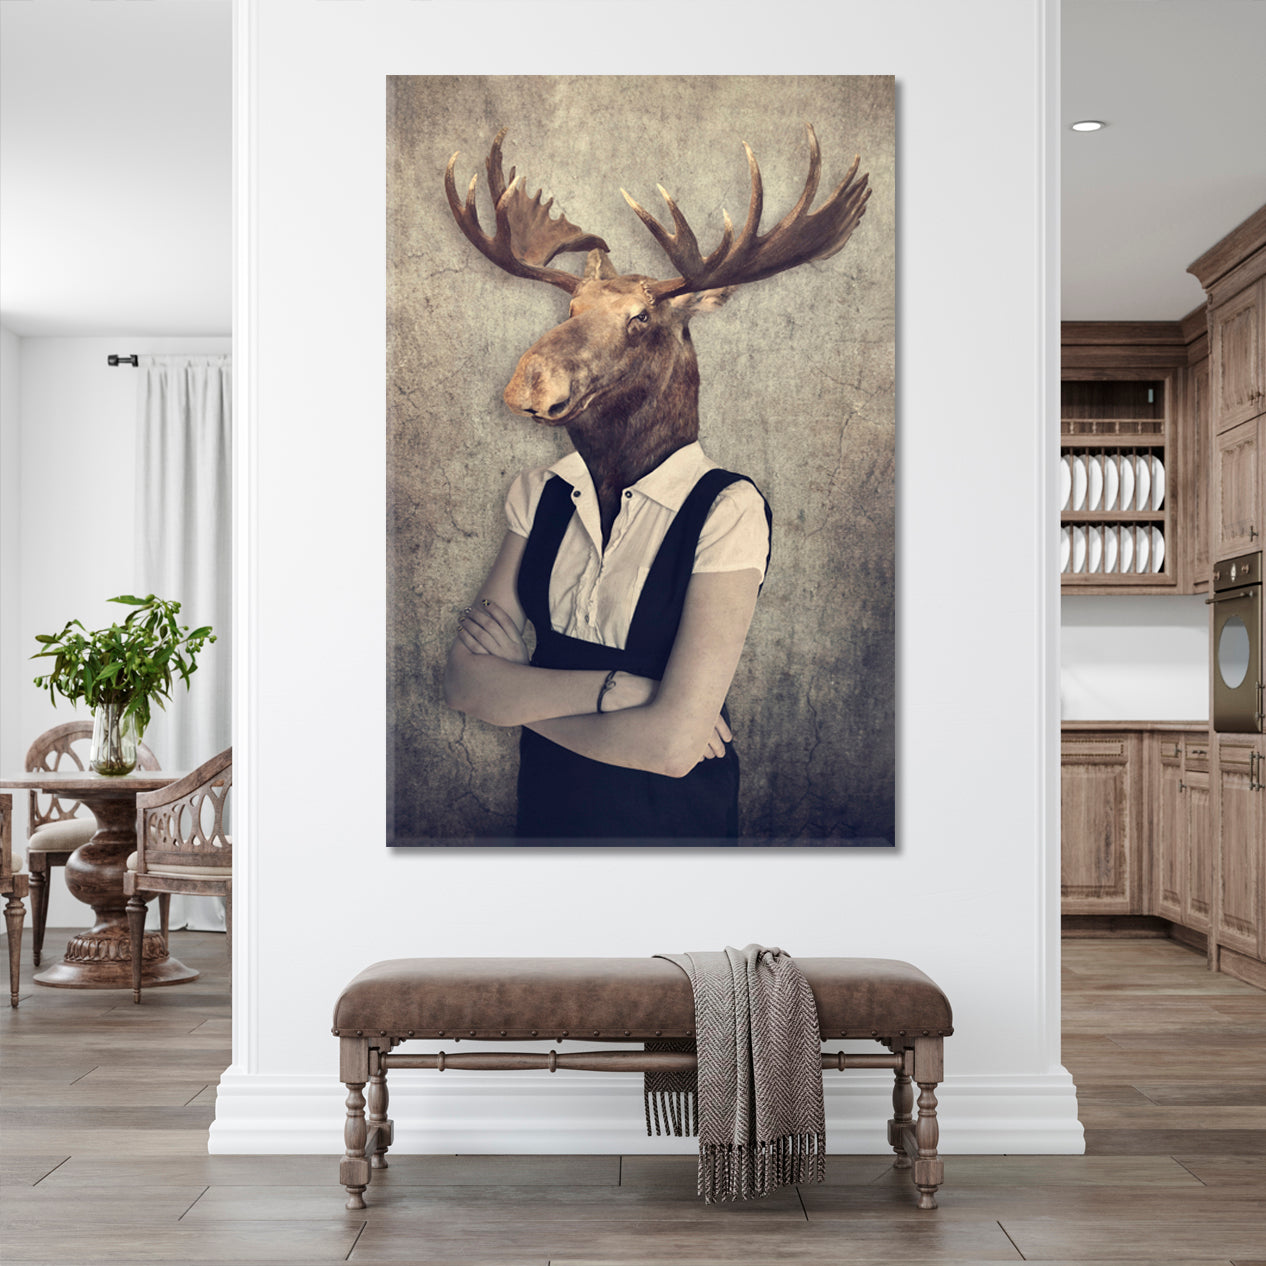 STYLISH HIPSTER ANIMALS Vintage Style Poster Office Wall Art Canvas Print Artesty 1 Panel 16"x24" 